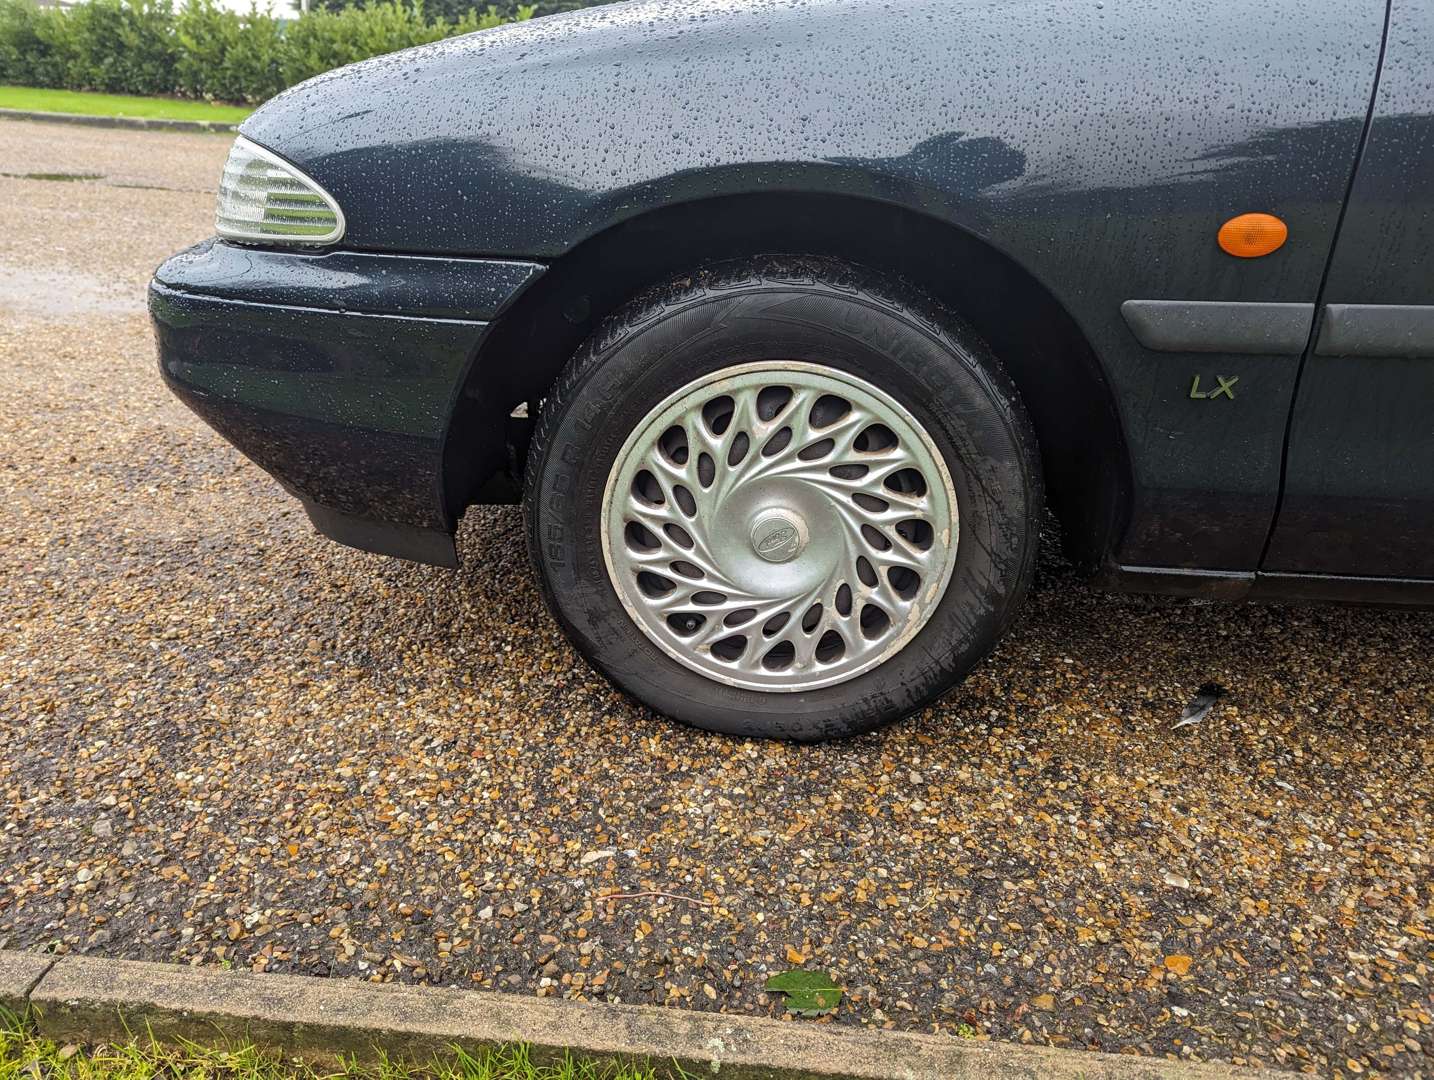 <p>1995 FORD MONDEO 1.8 LX</p>